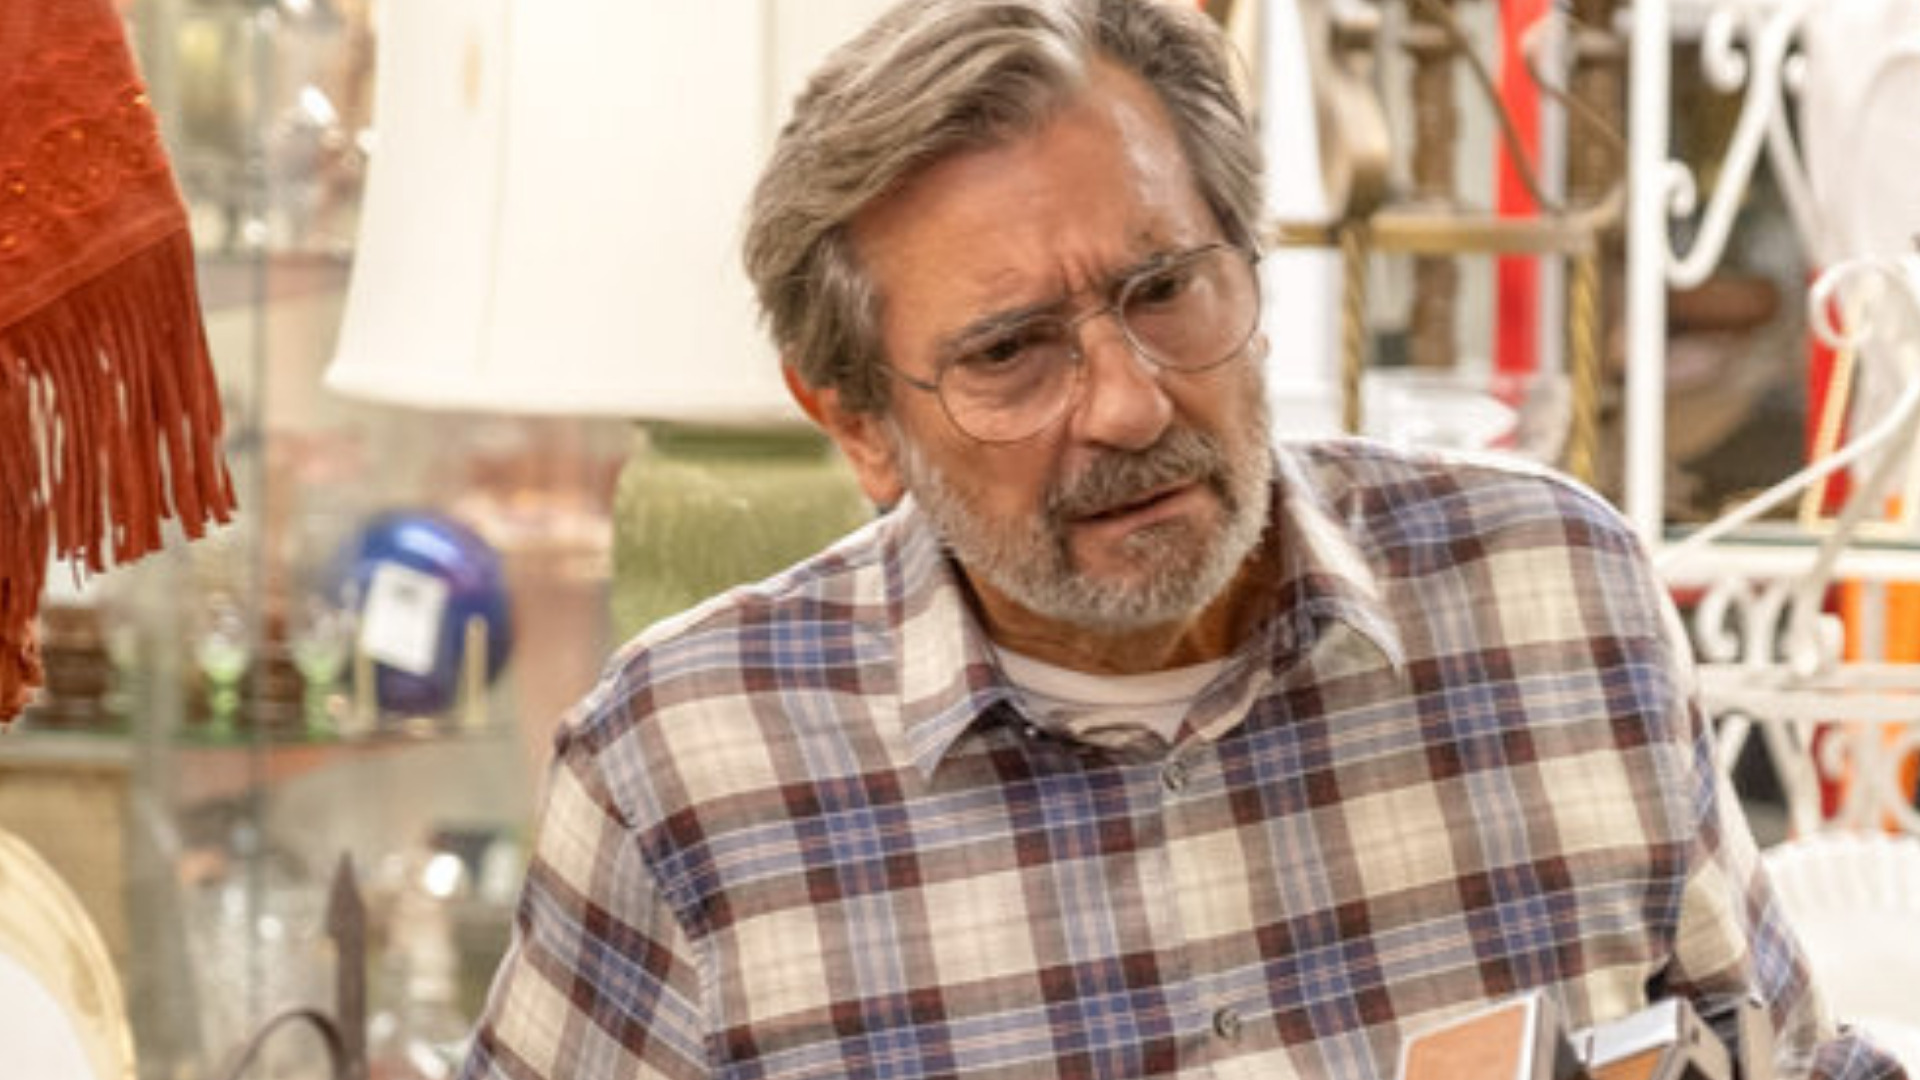 Griffin Dunne as Nicky looks at an expensive antique camera in horror in ‘This Is Us’ Season 6 Episode 2